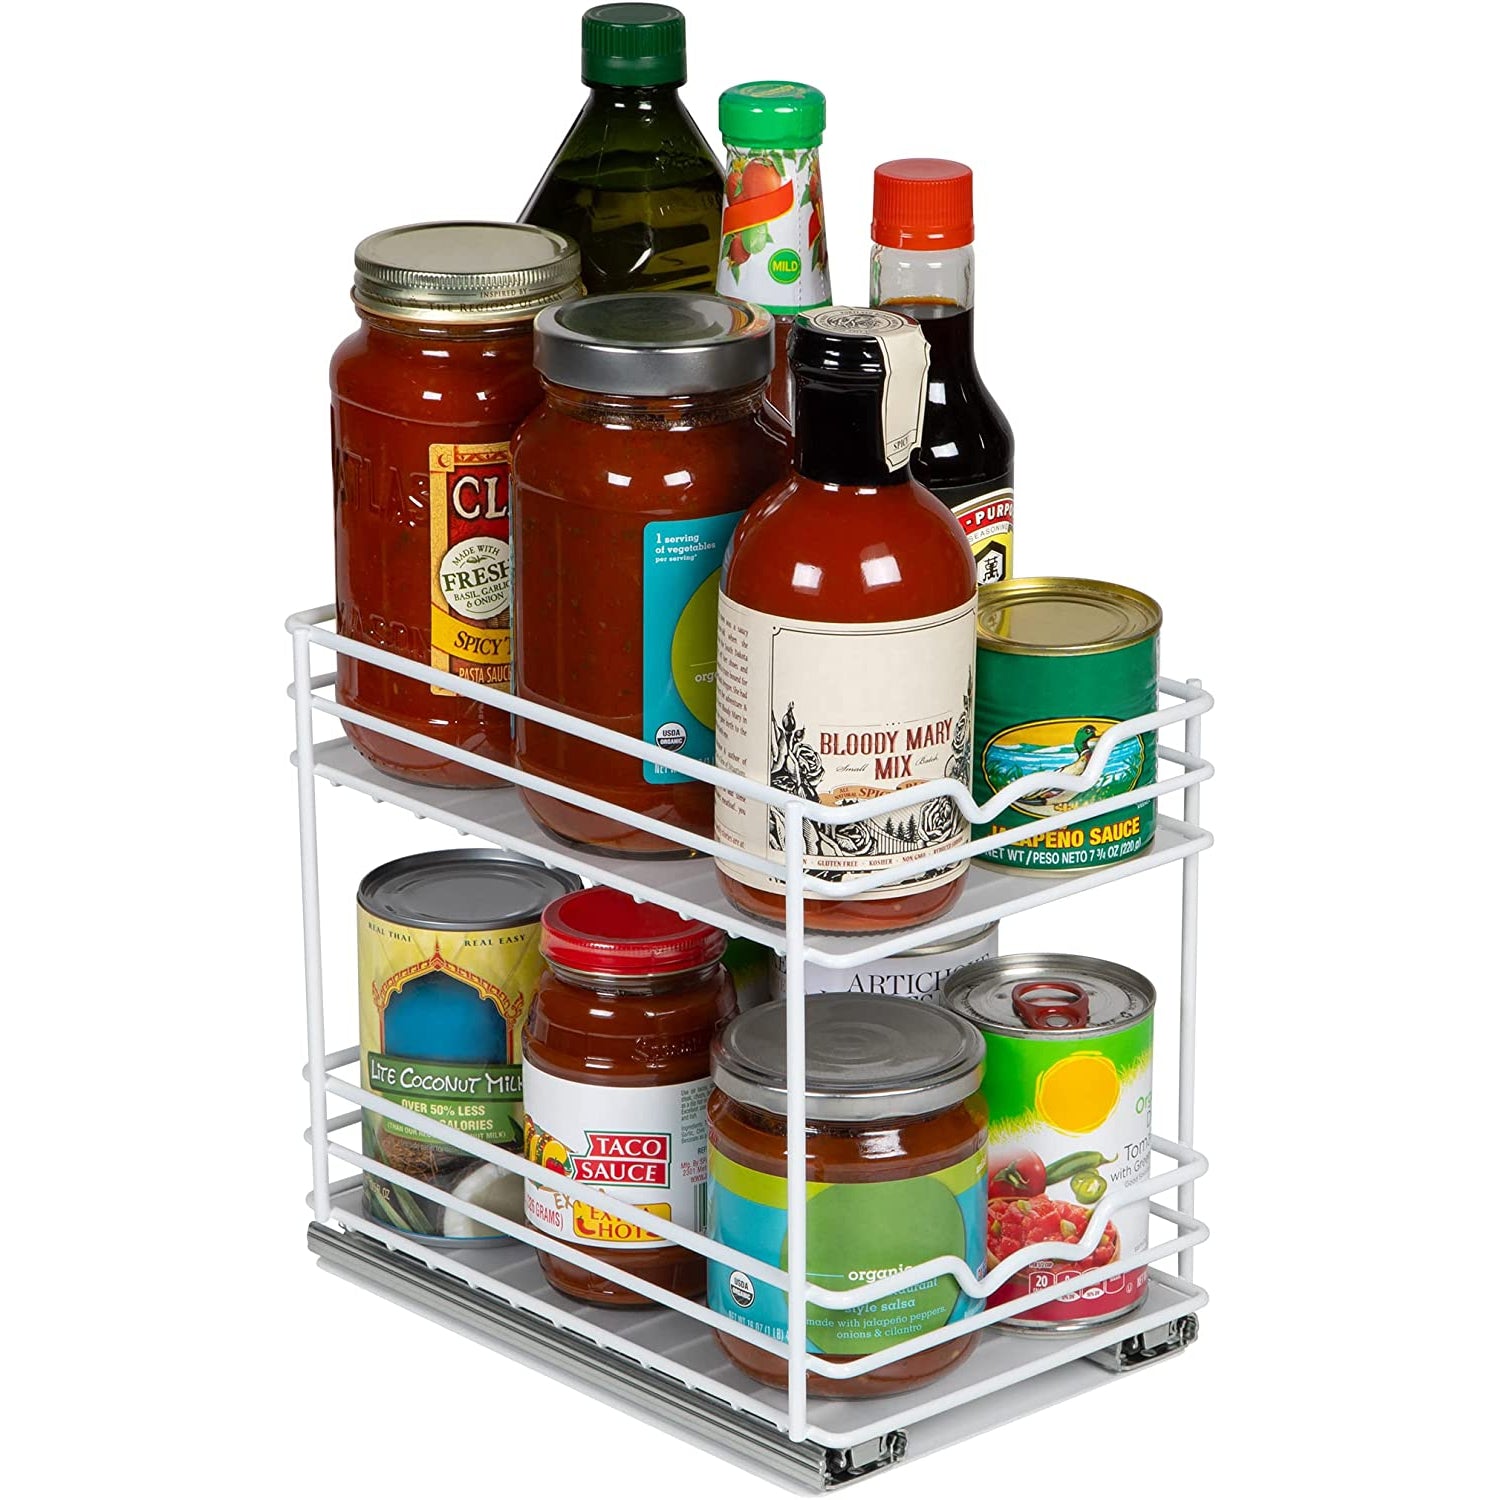 Spice Rack Organizer for Cabinet, Heavy Duty - Pull Out Spice Rack 5 Year Warranty, White Finish